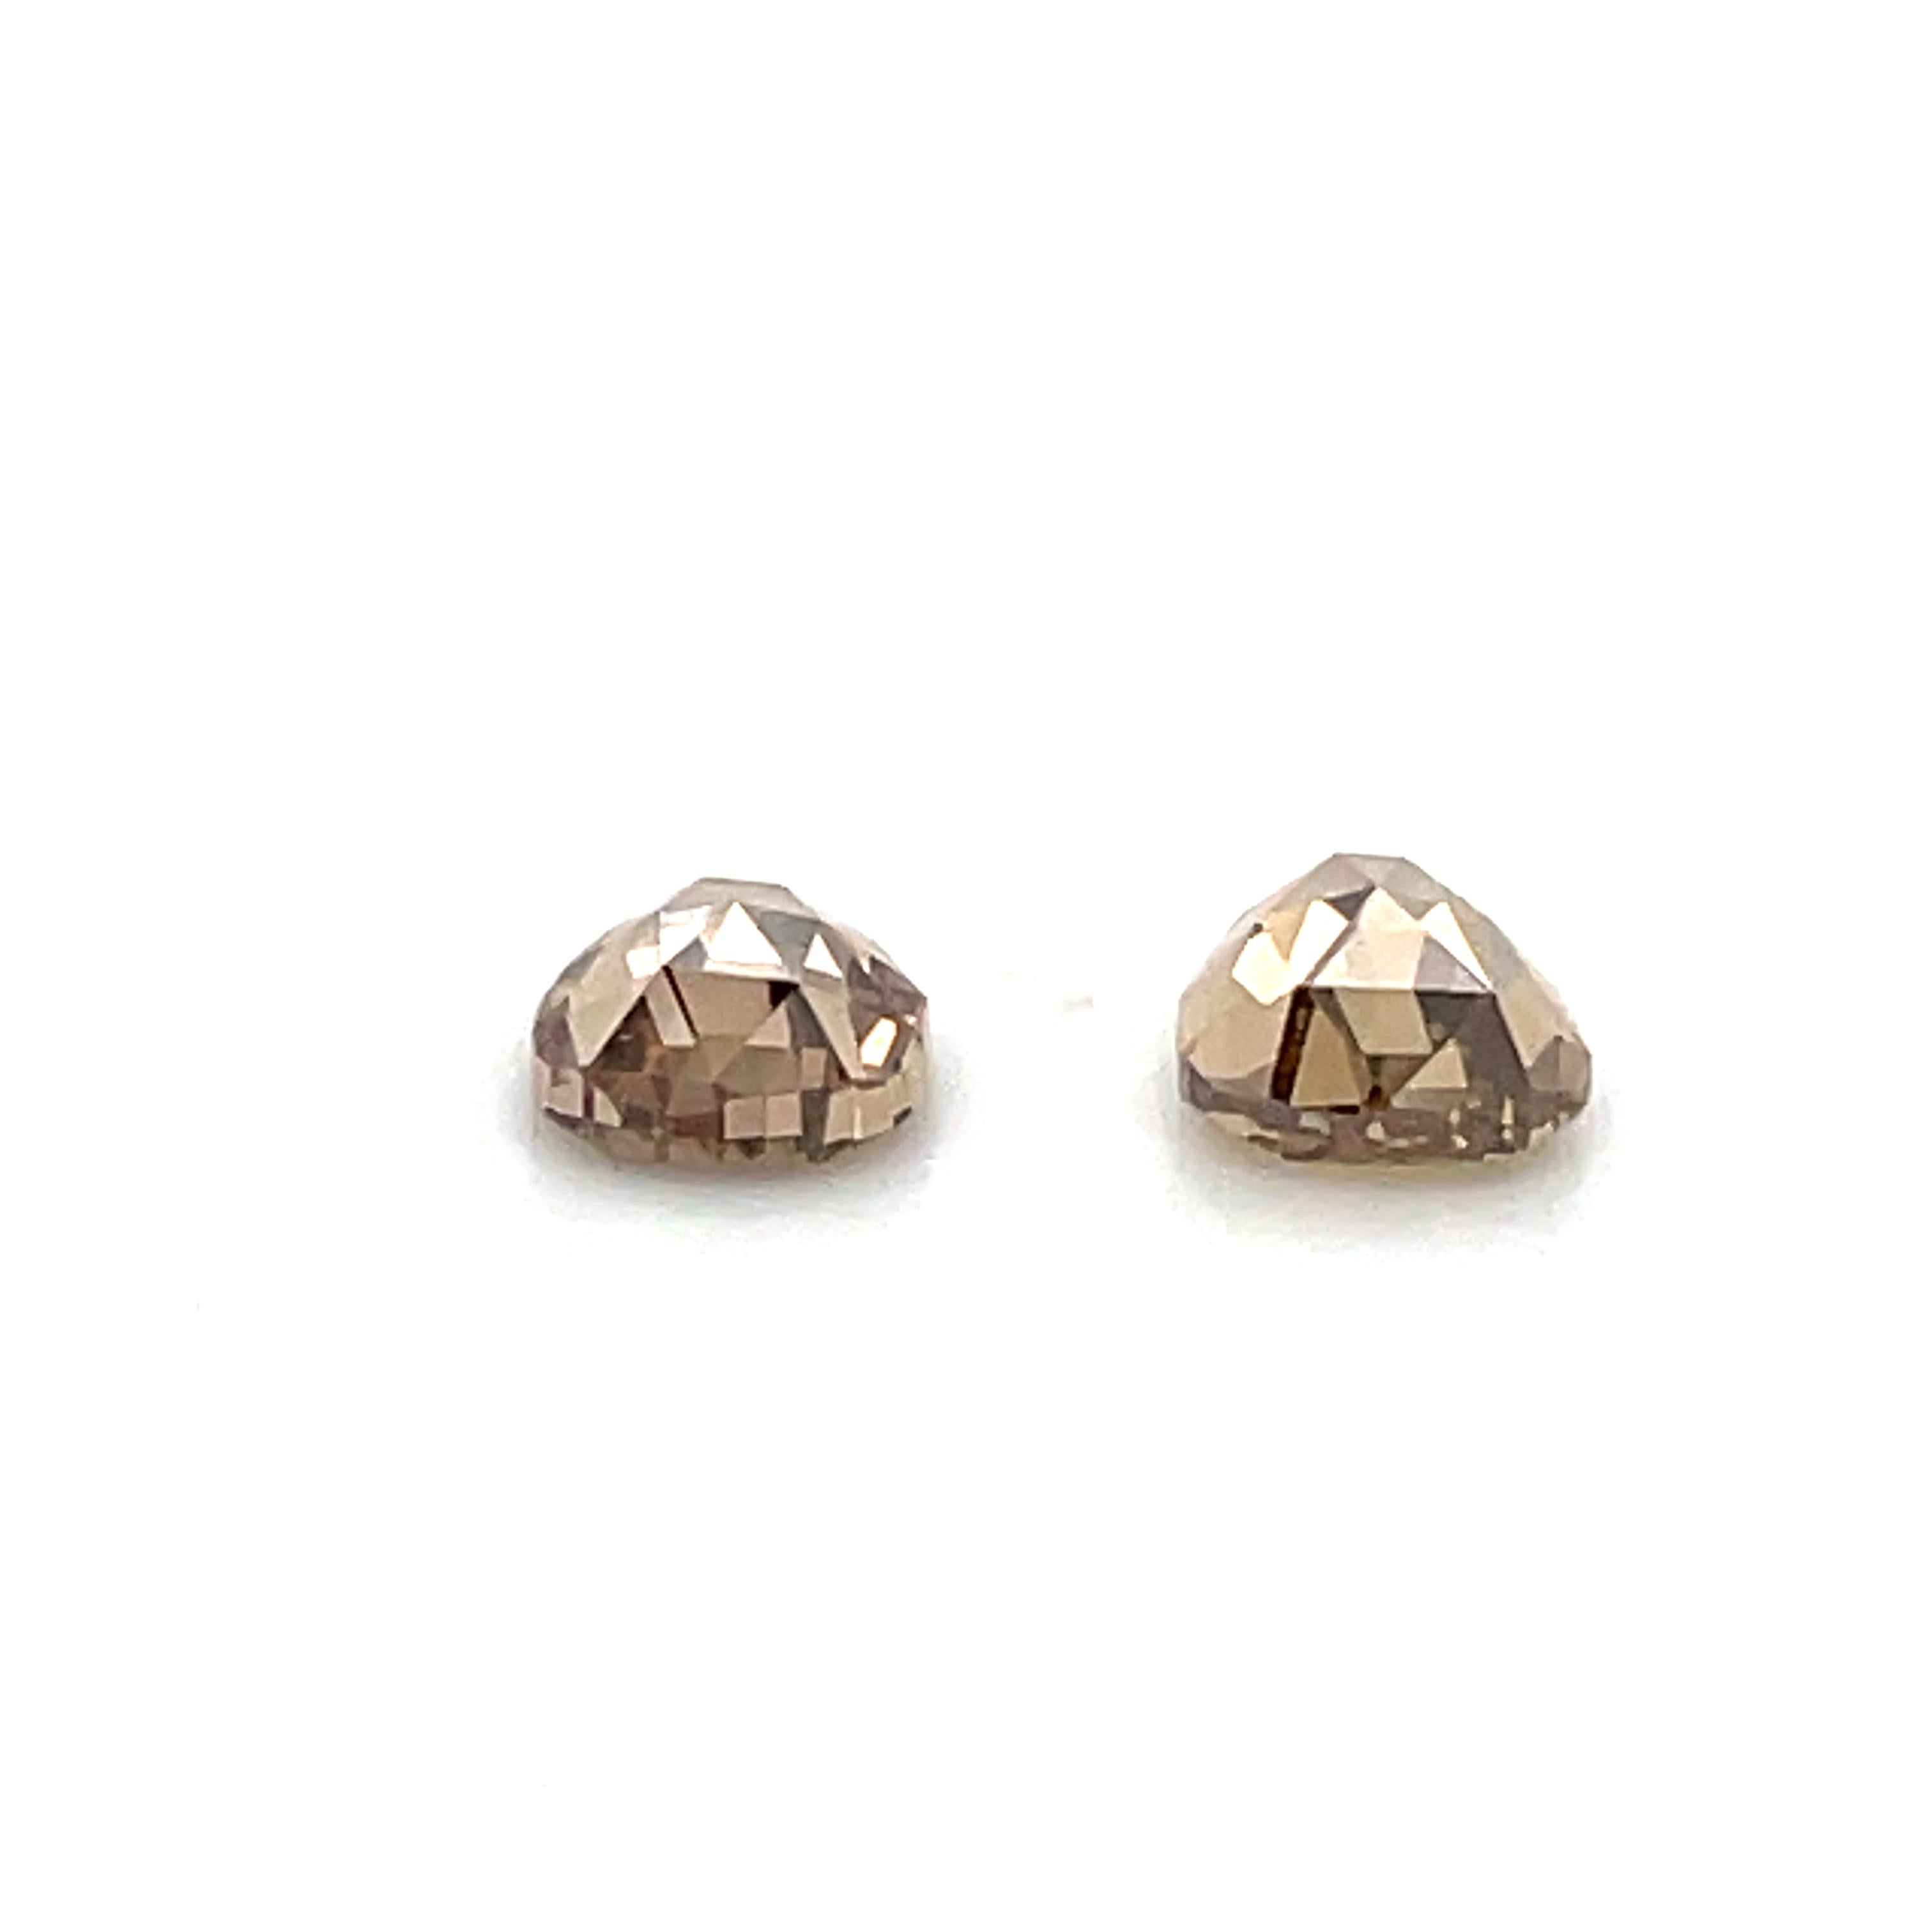 Introducing a stunning pair of pear-shaped, 2.05-carat brown diamonds.

Many believe that the significance of these brown diamonds is related to stability and strength.

They are a great option for anyone looking for something unique and